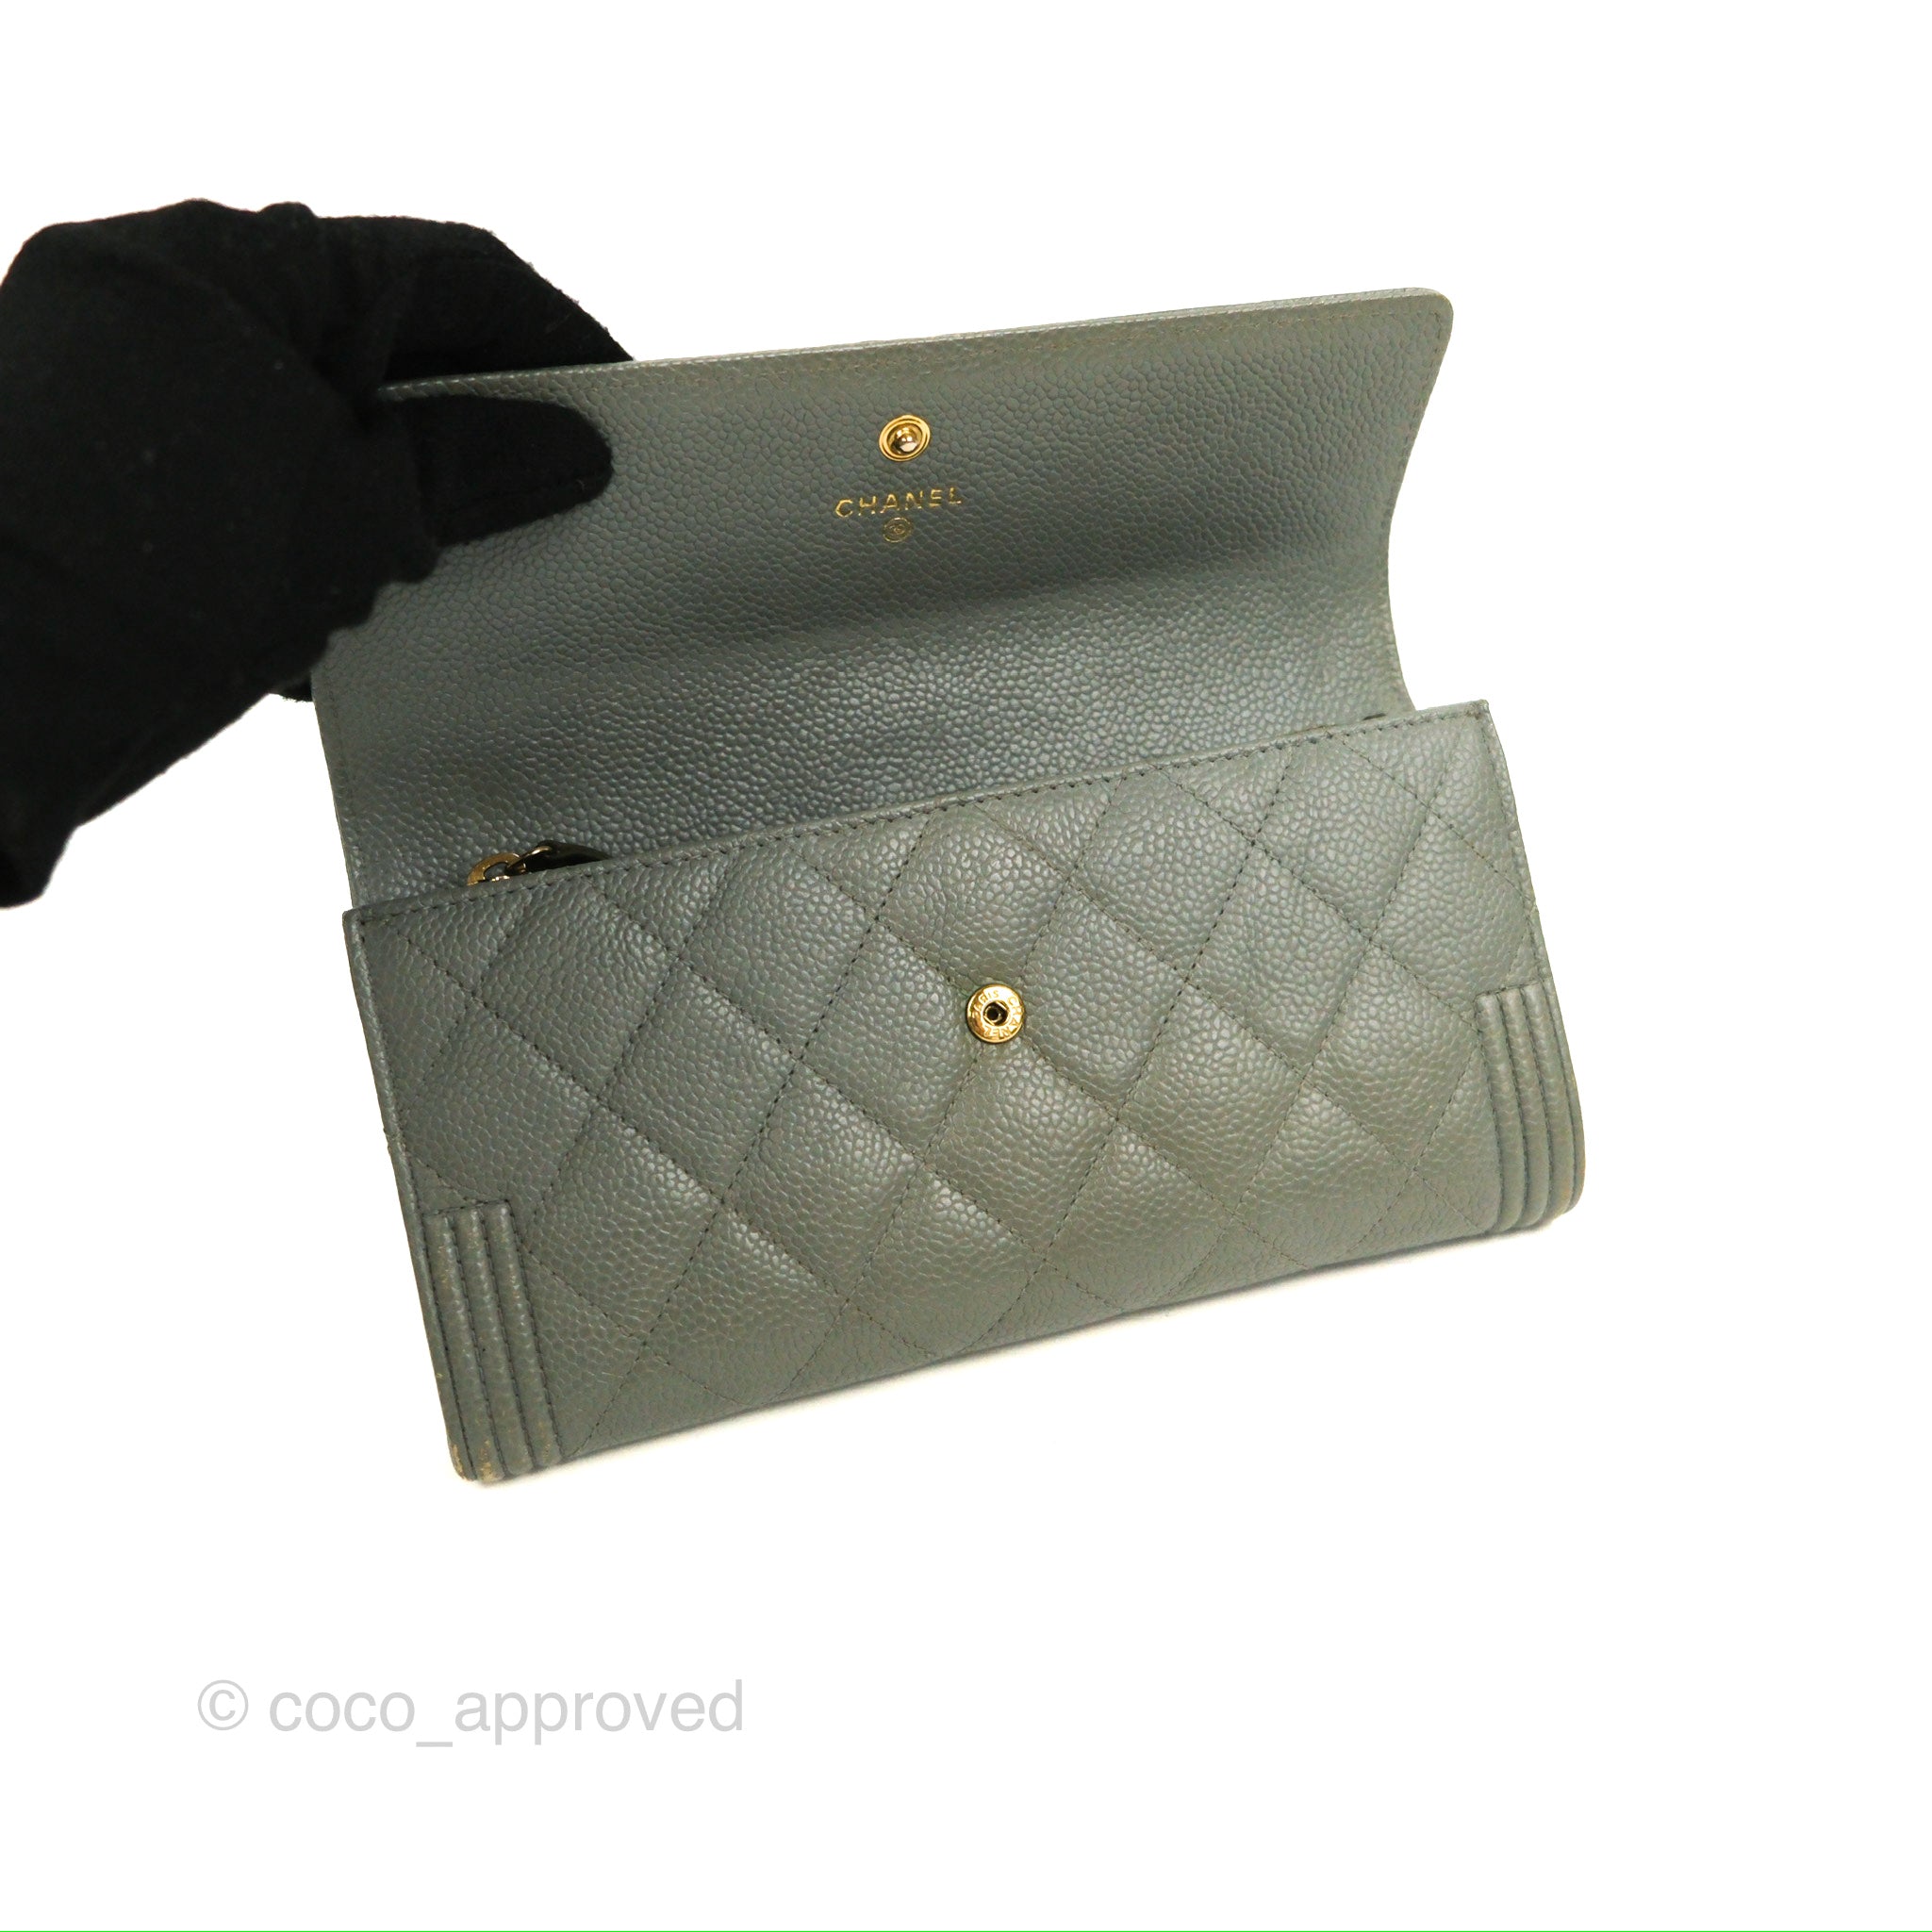 Glampot - Own this gorgeous, Green Lambskin Long Flap Wallet from Chanel as  low as RM 918.02 per month only via Hoolah. Enjoy 0% installment for 3  months. Checkout by 26th Sep